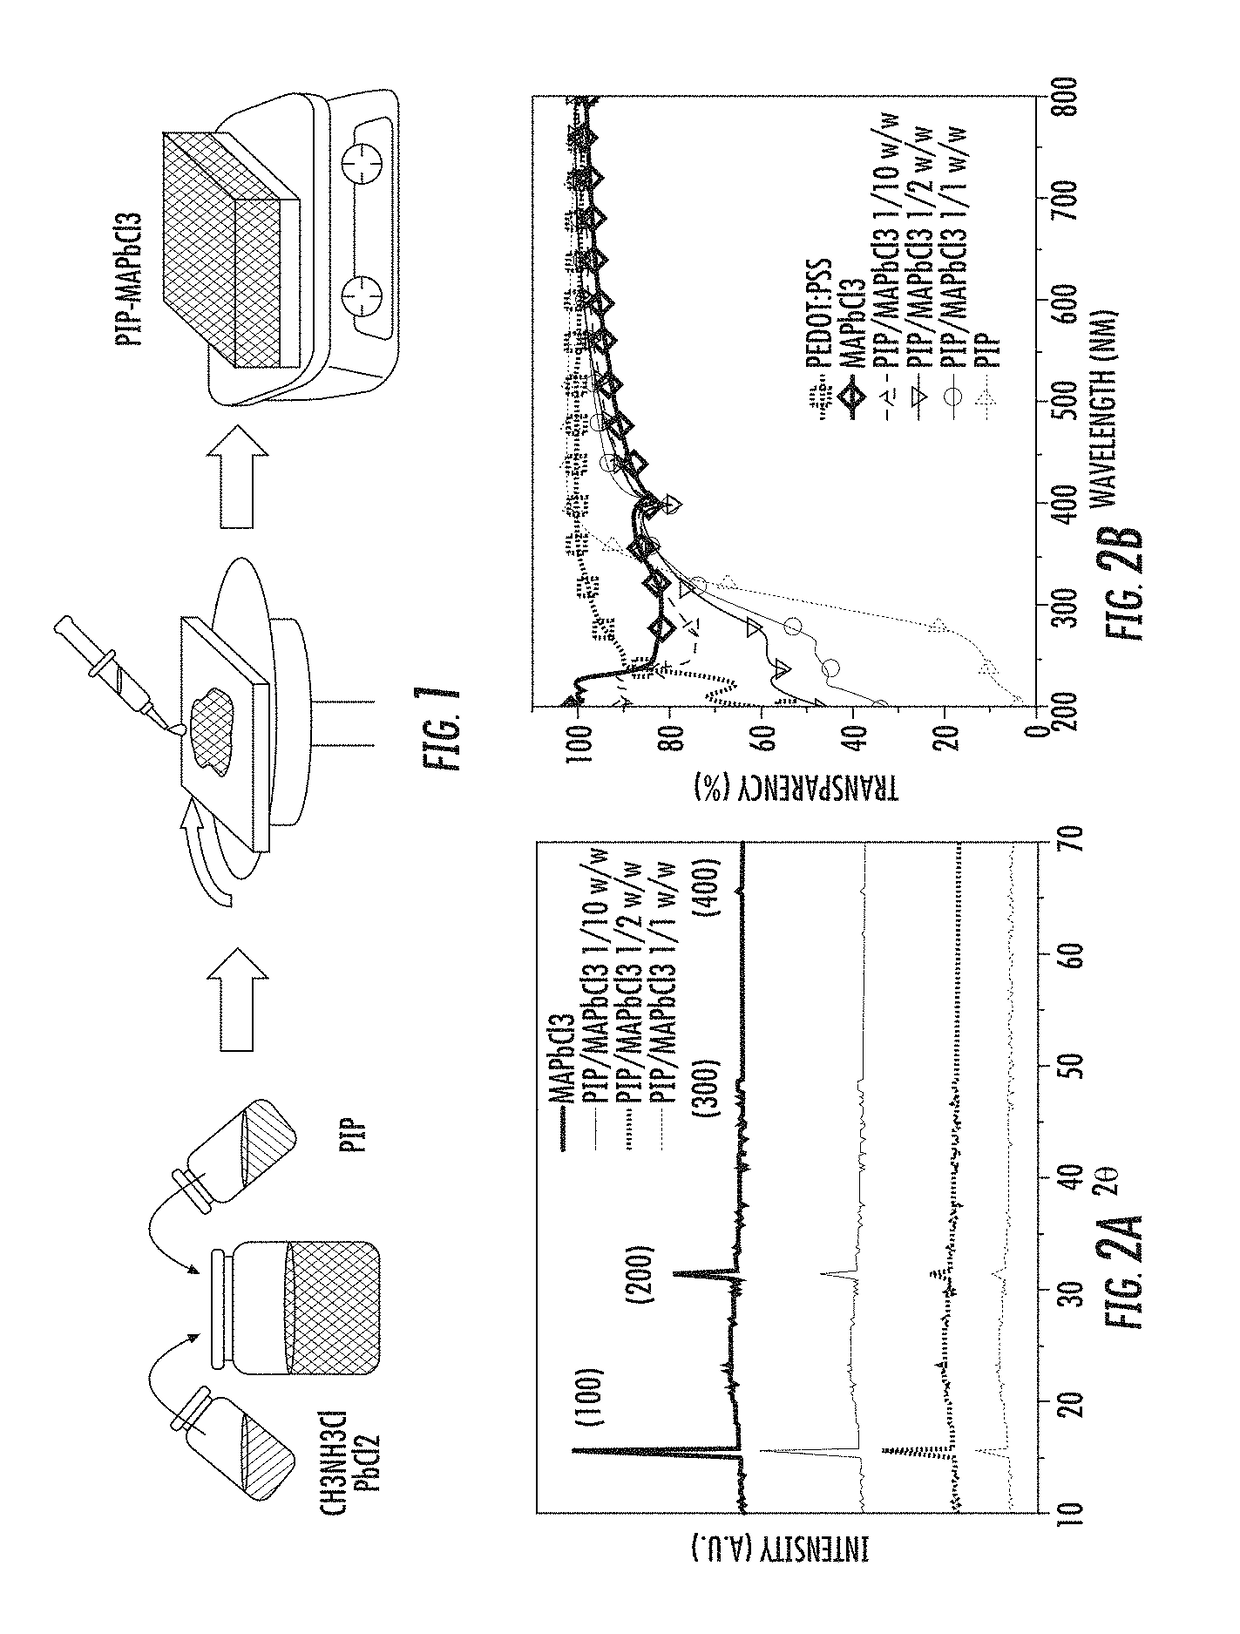 Polymer-perovskite films, devices, and methods